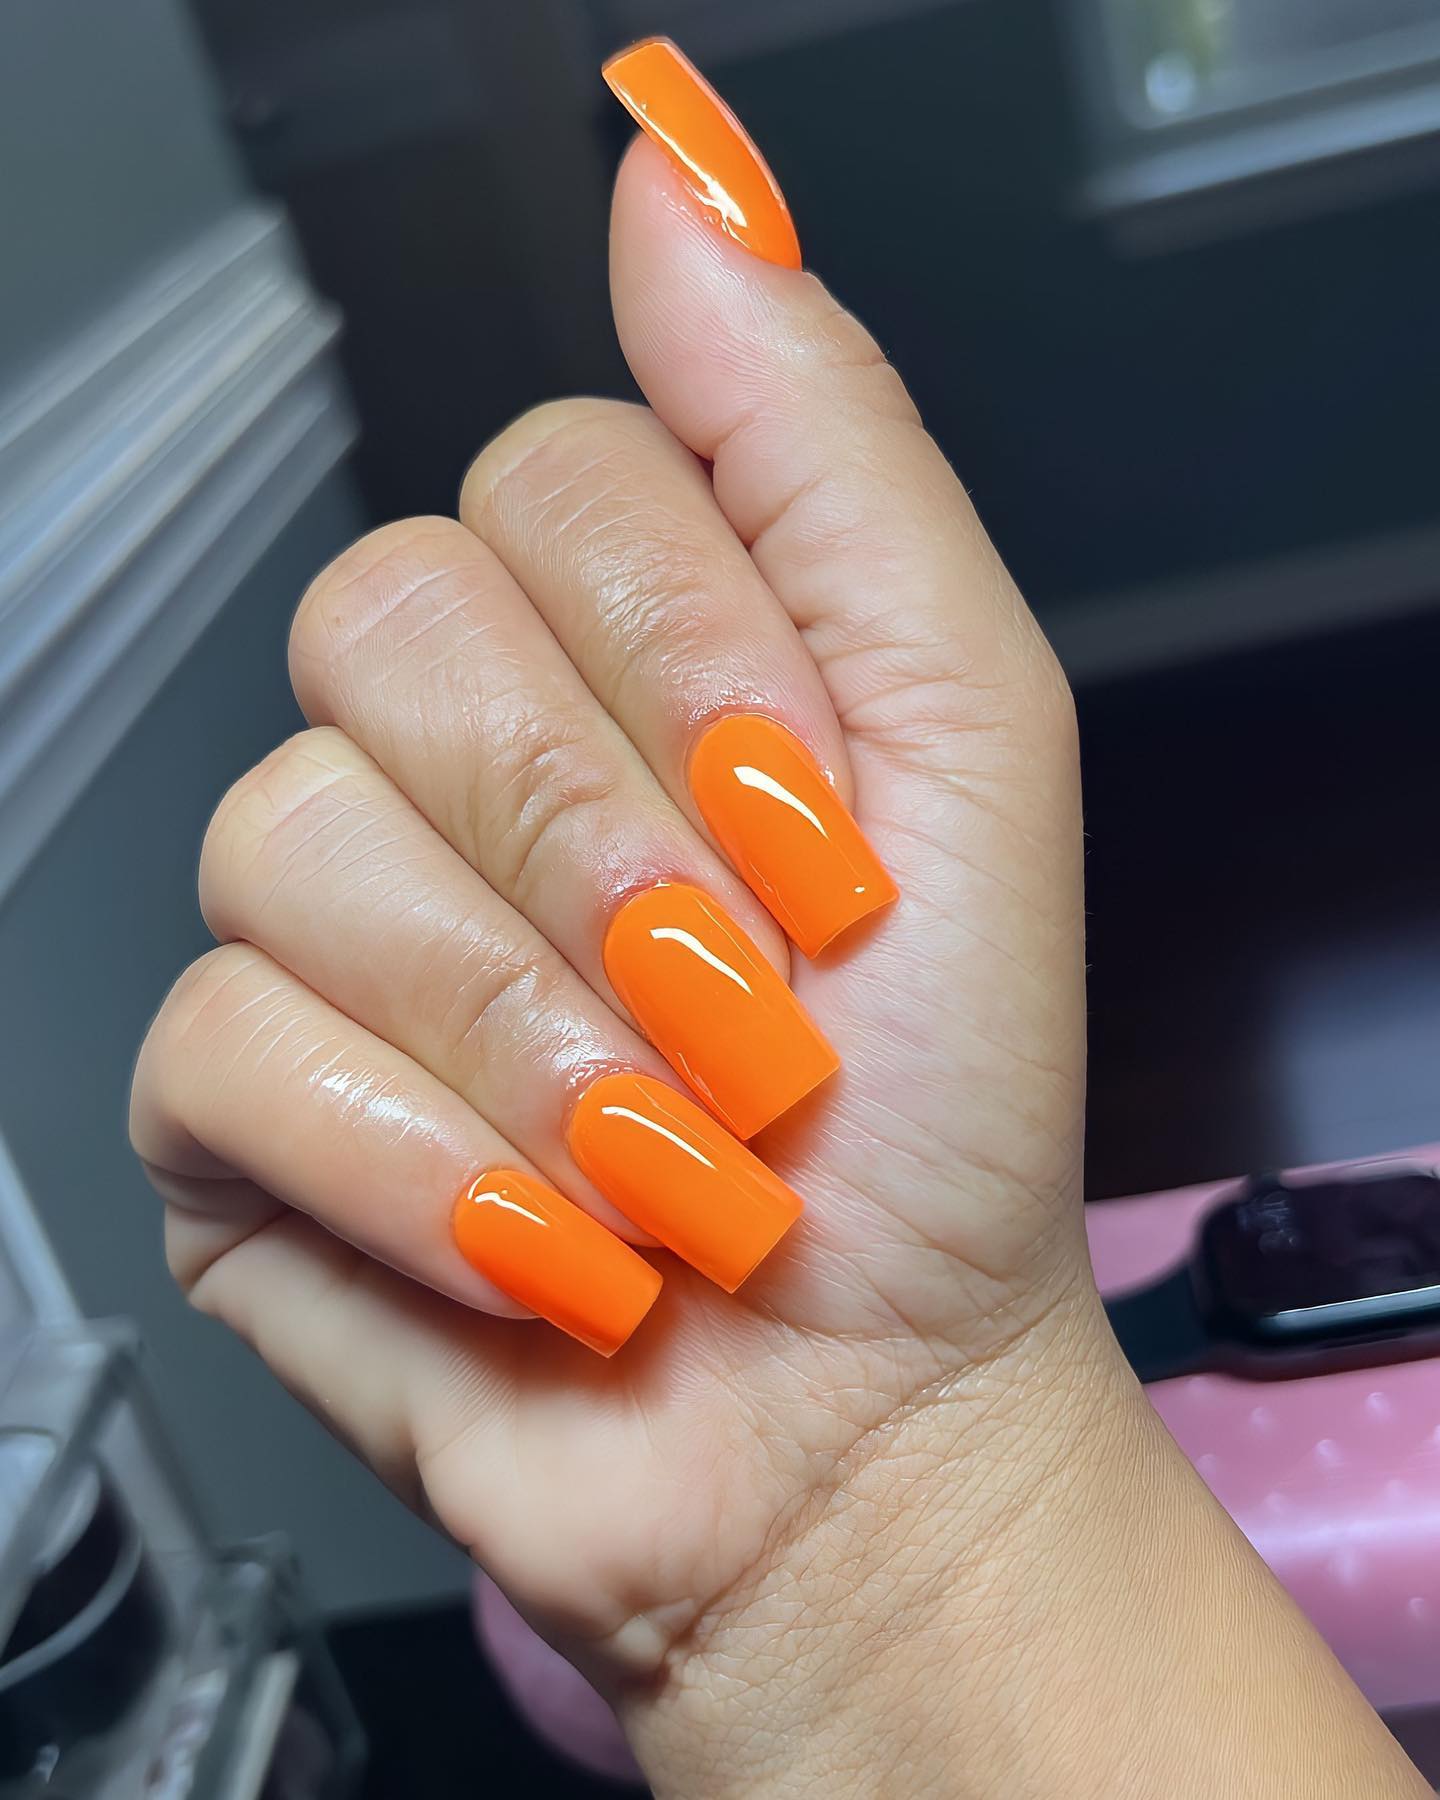 Orange is a bold color, and if you want to try it out, we'd recommend going for something more fun than straight orange. Maybe try a neon orange? It will look great on your fingers!